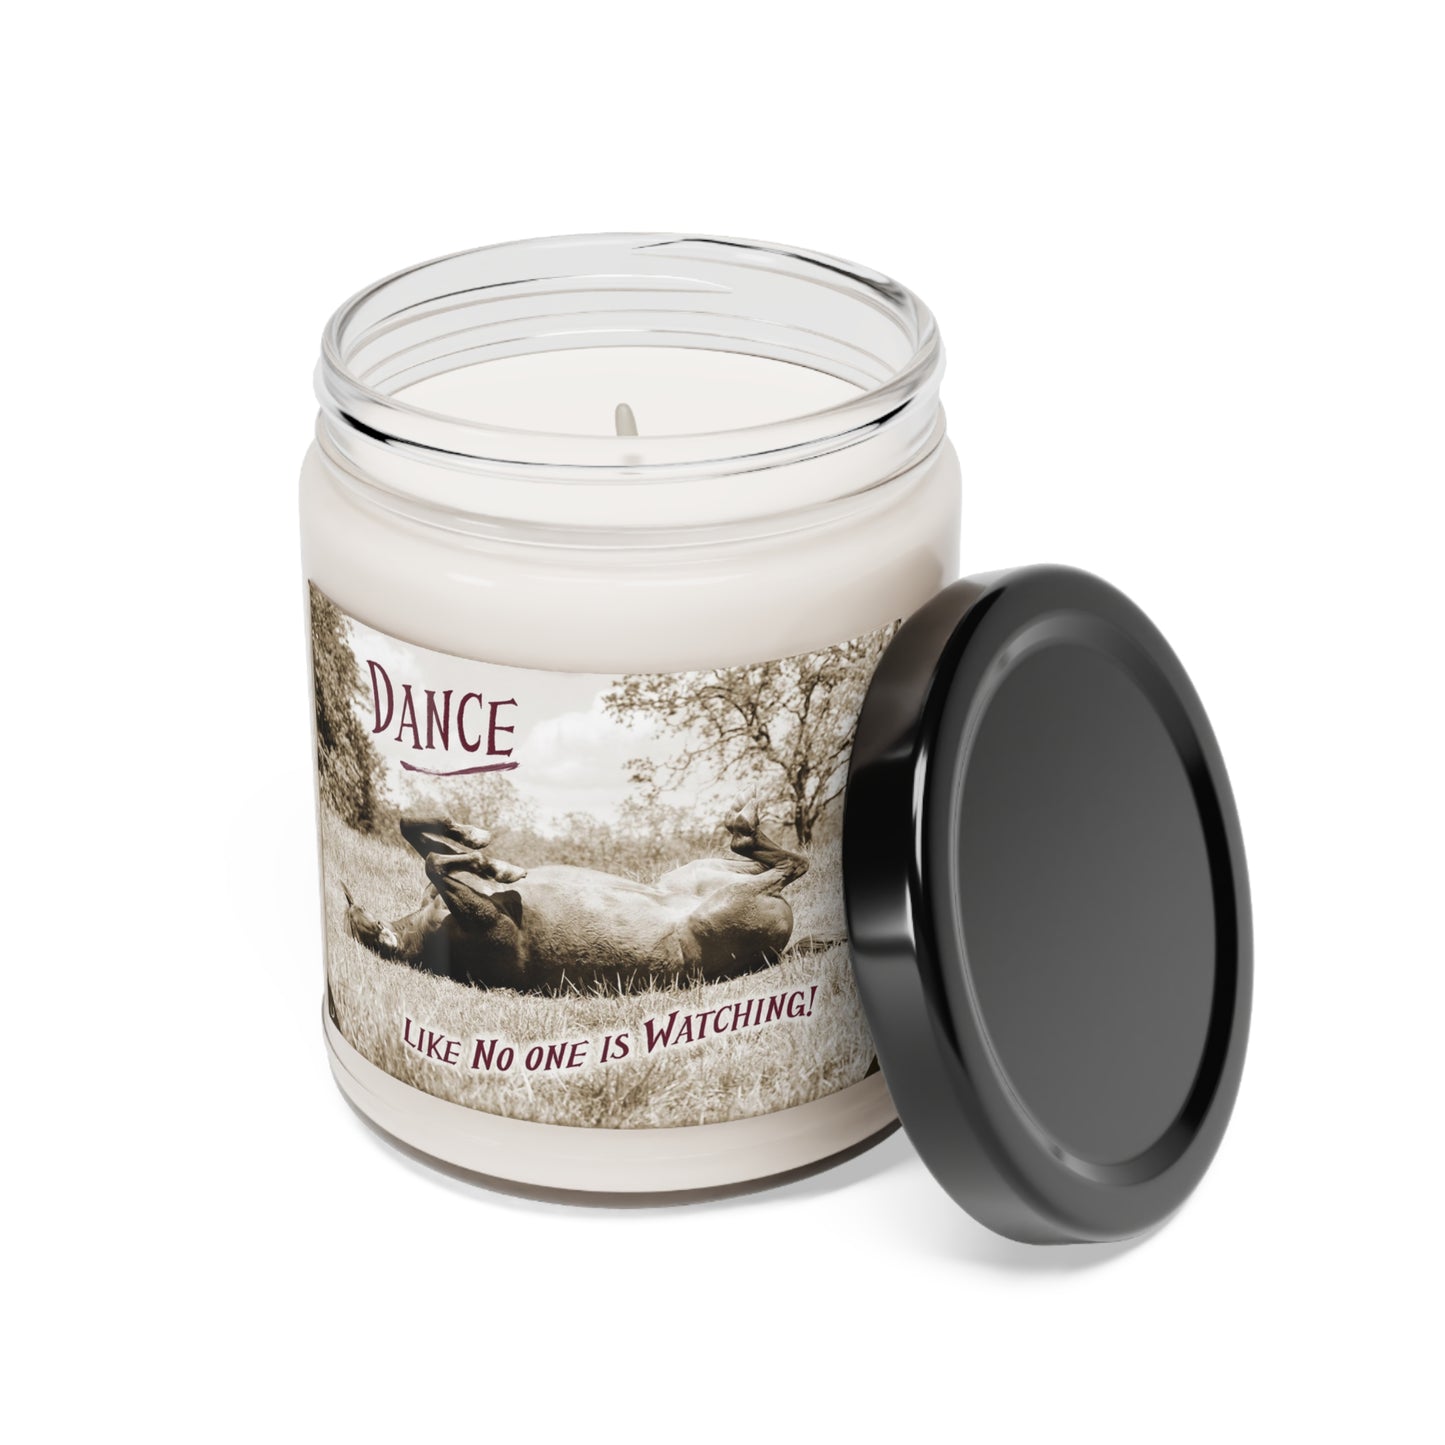 Dance like no one is Watching Horse Cowboy Western CandleScented Soy Candle, 9oz